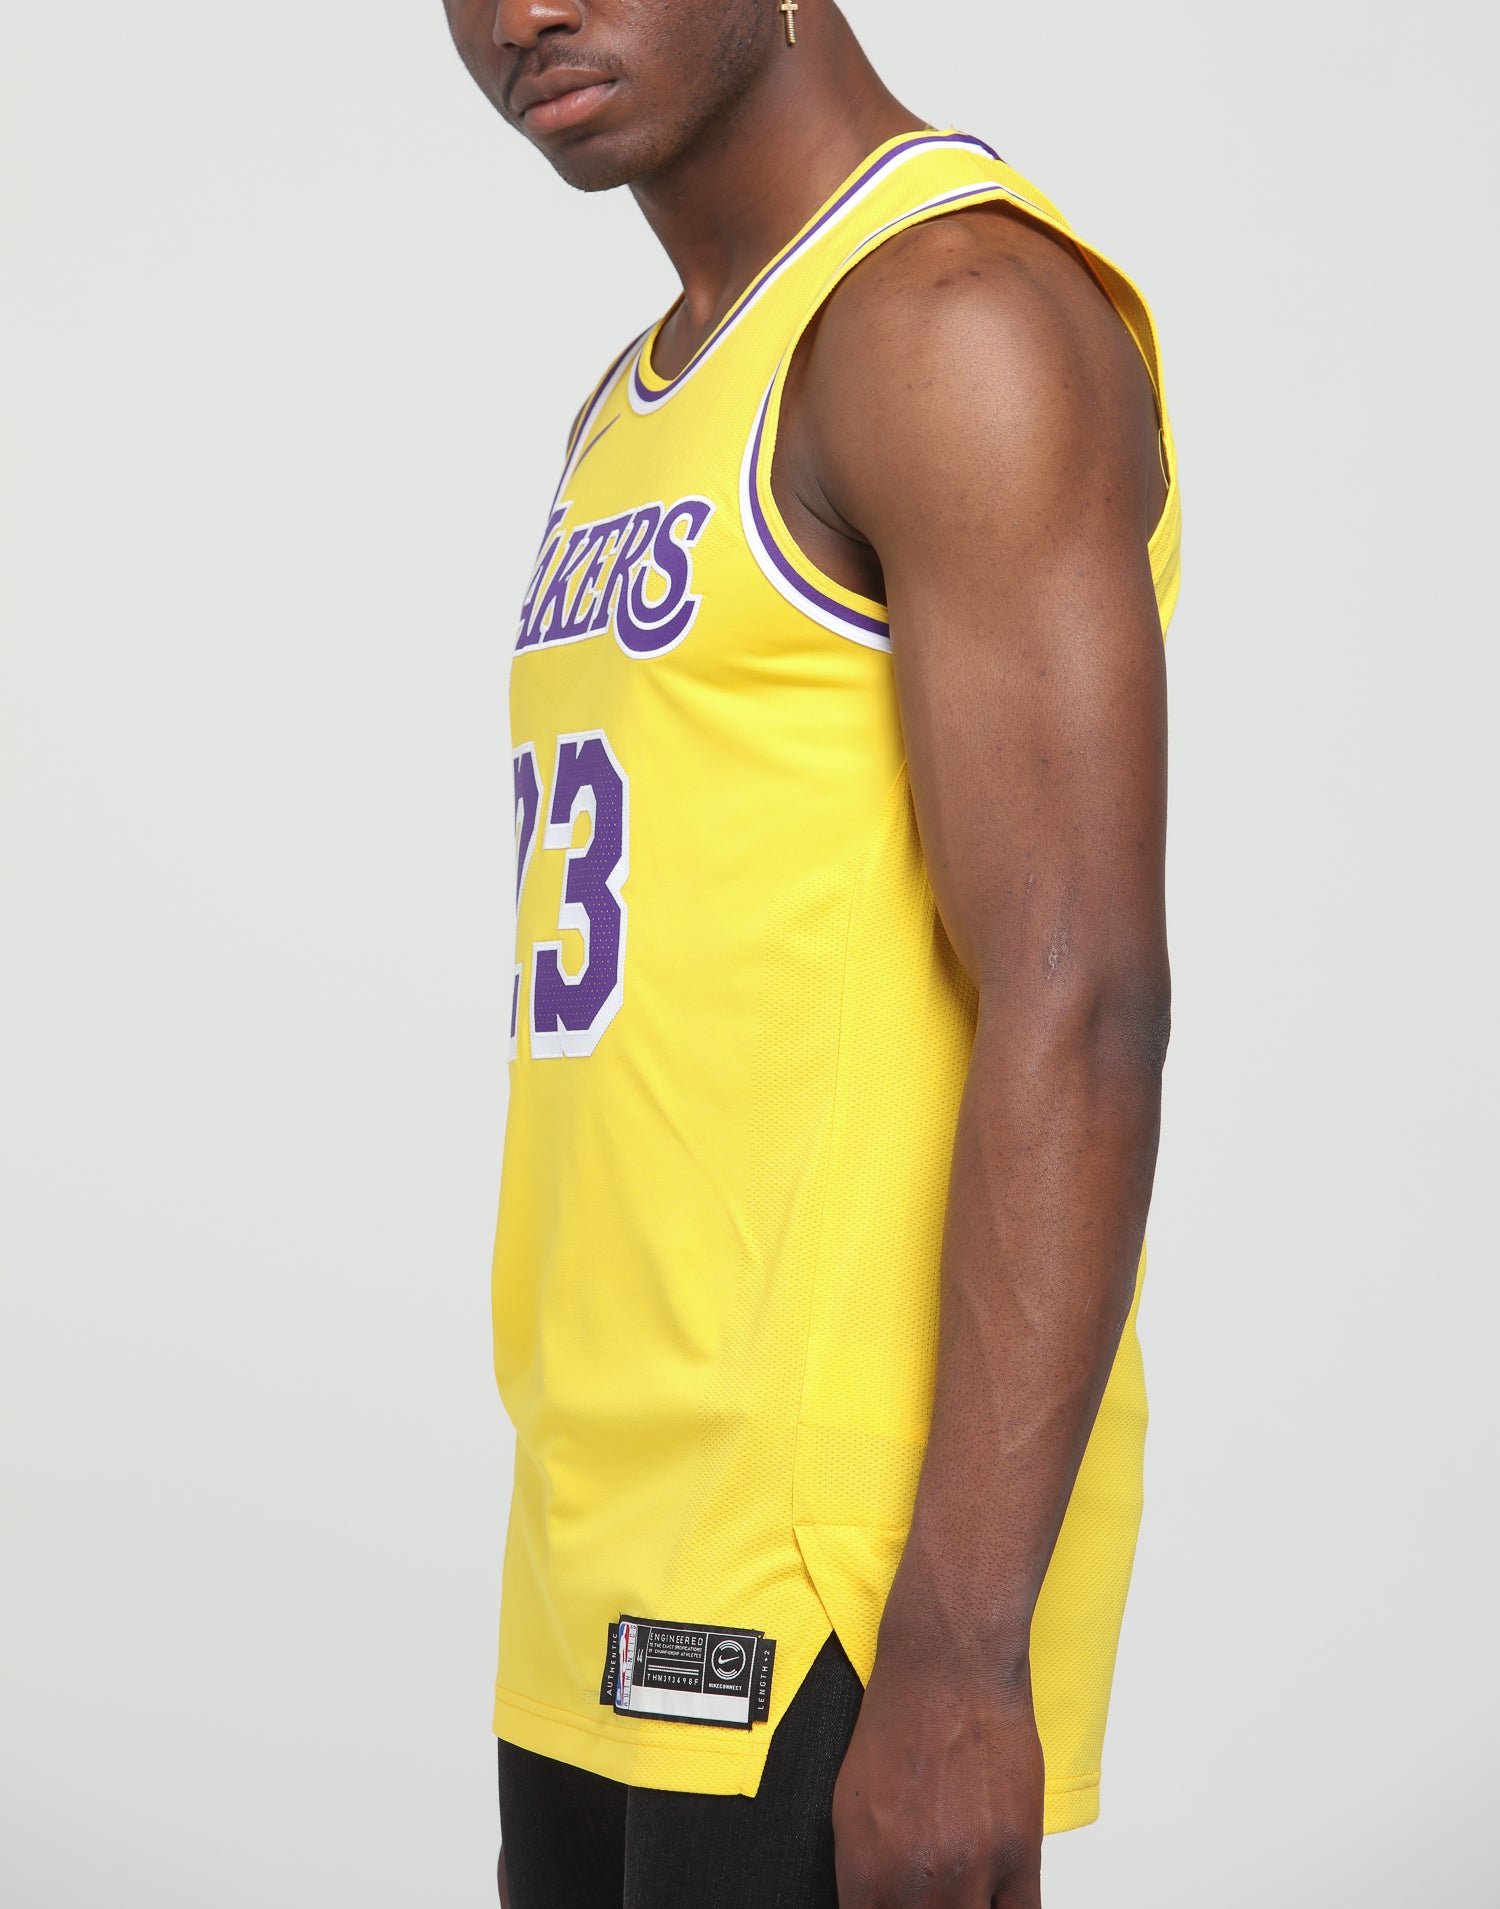 lebron lakers jersey official